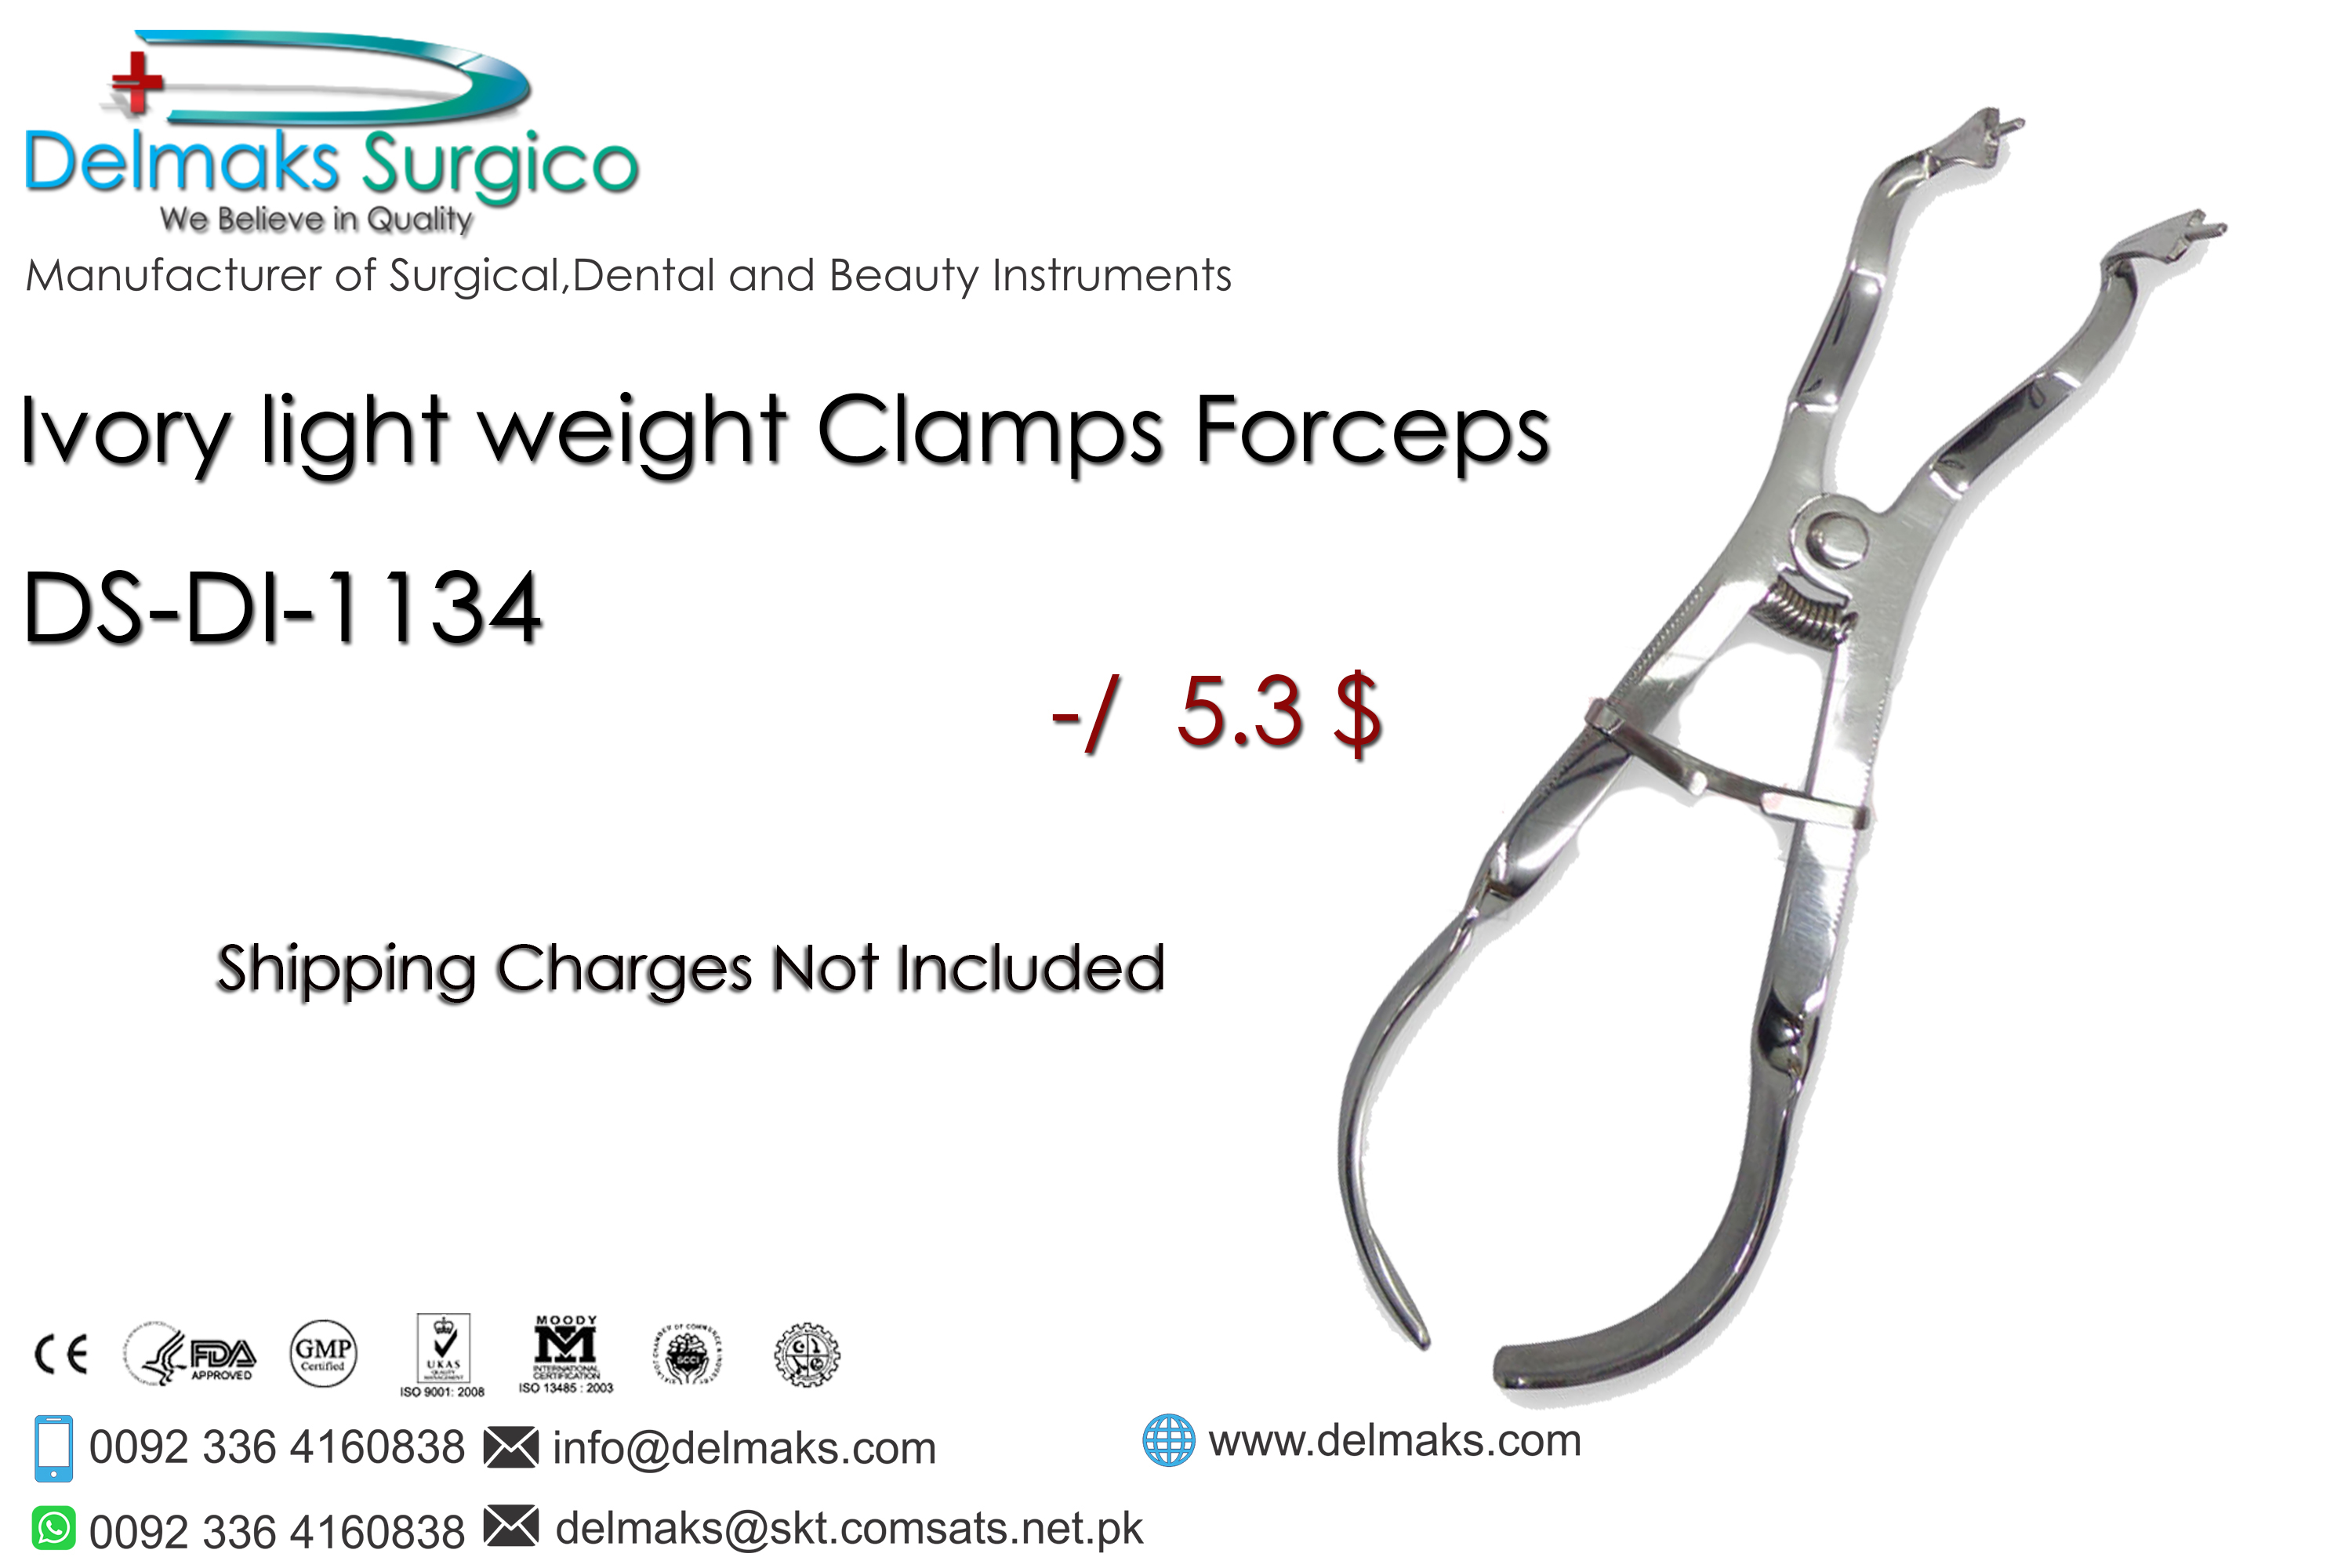 Ivory Light Weight Clamp Forceps-Rubber Dam Instruments-Dental Implants-Crown Instruments-Orthodontics-Syringes-Orthodontic Pliers-Instruments-Dental Instruments-Extracting Forceps-Delmaks Surgico-Den